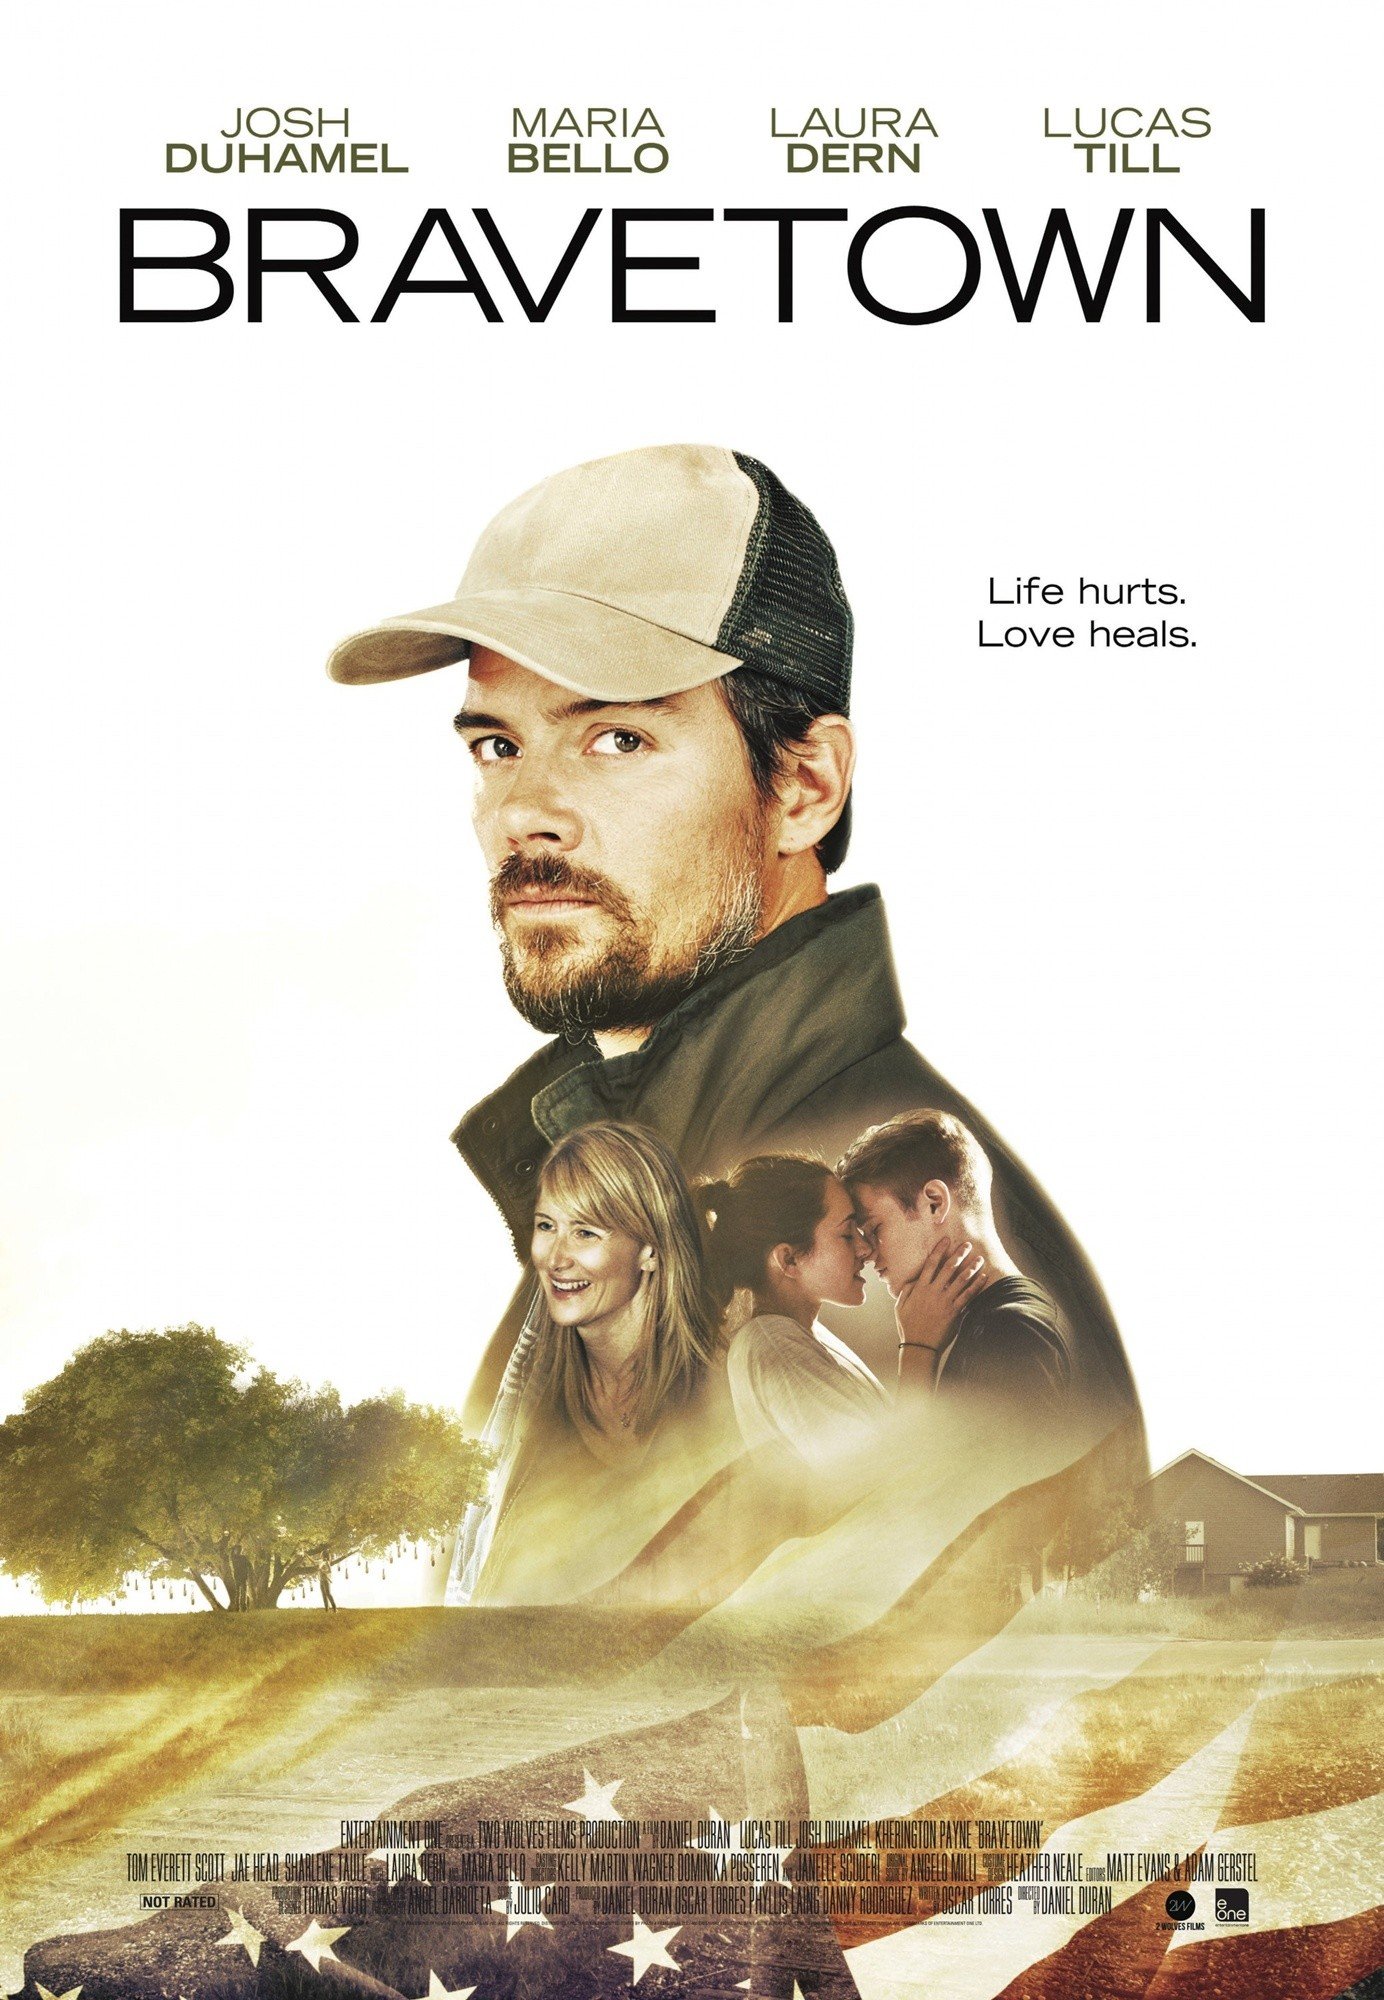 Poster of the movie Bravetown